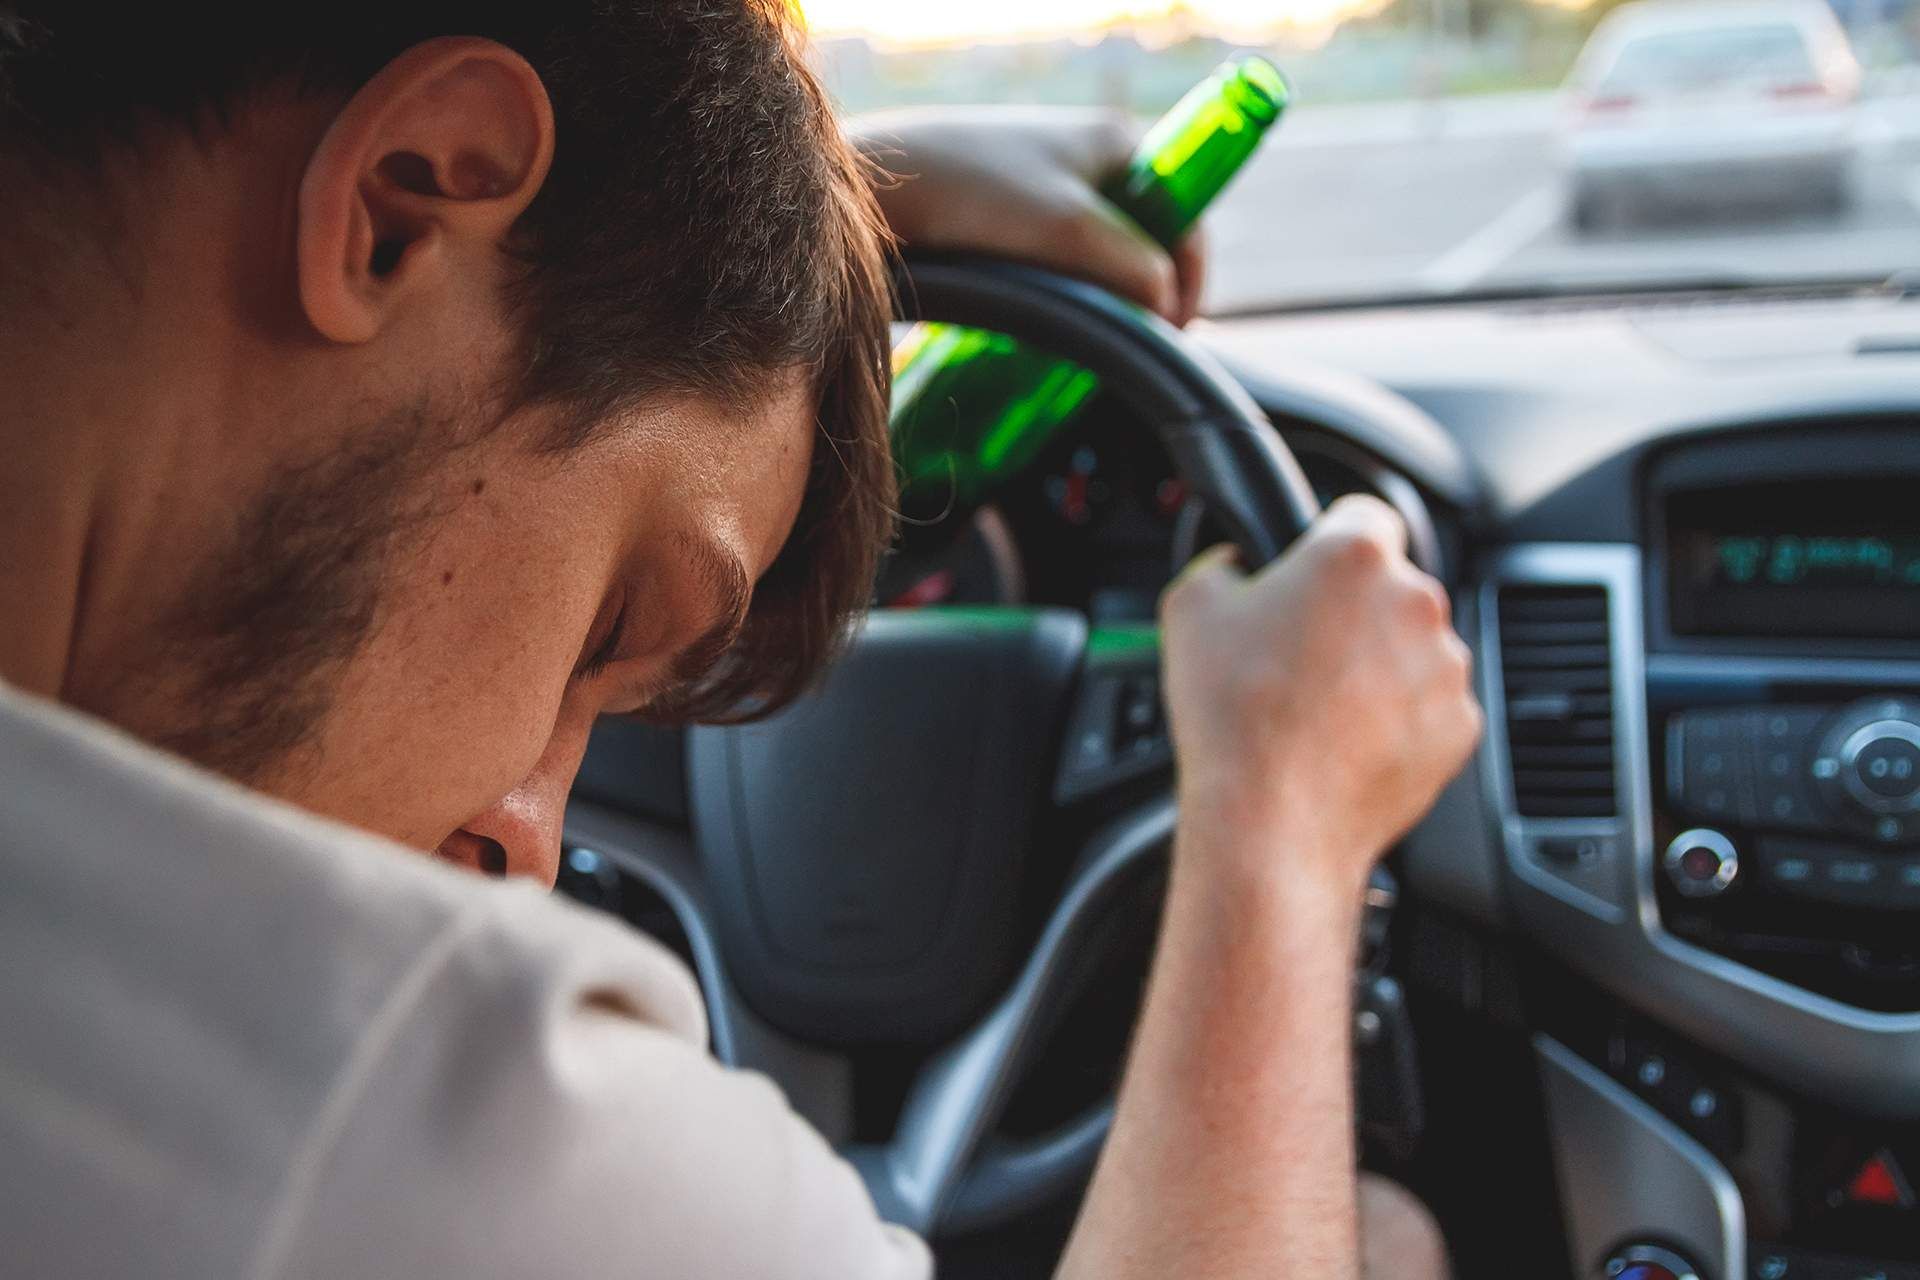 A man is driving a car while holding a bottle of beer.